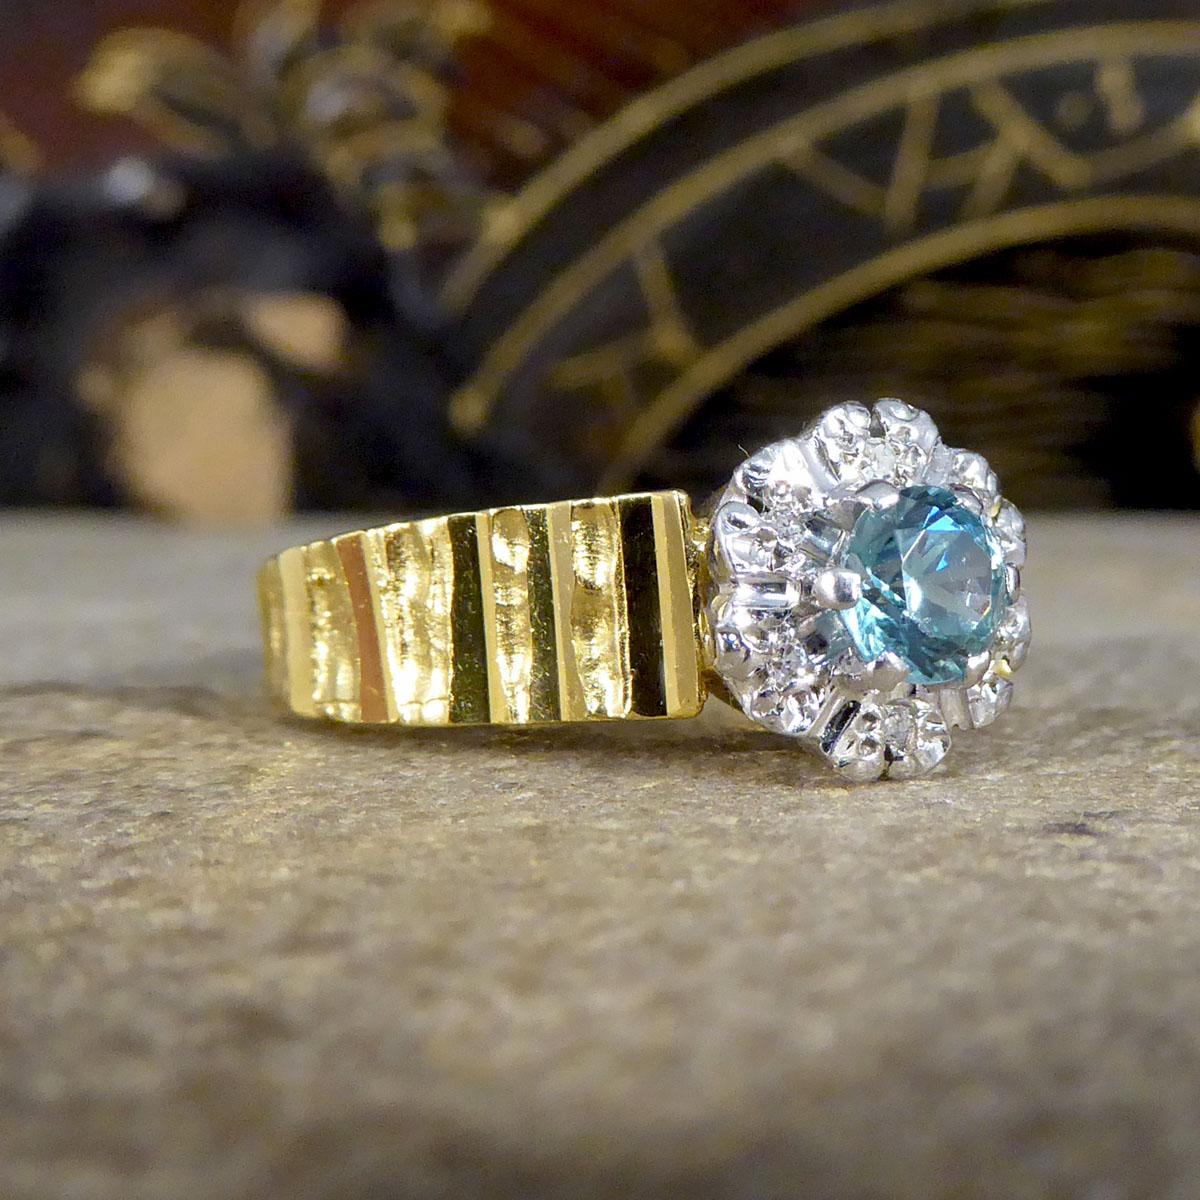 Such a gorgeous classic 1970's designed ring with a bark effect detail around the 18ct Yellow Gold band. The centre of the ring is a Zircon and Diamond cluster set in 18ct White Gold. The whole ring itself has been made with great detail and is a